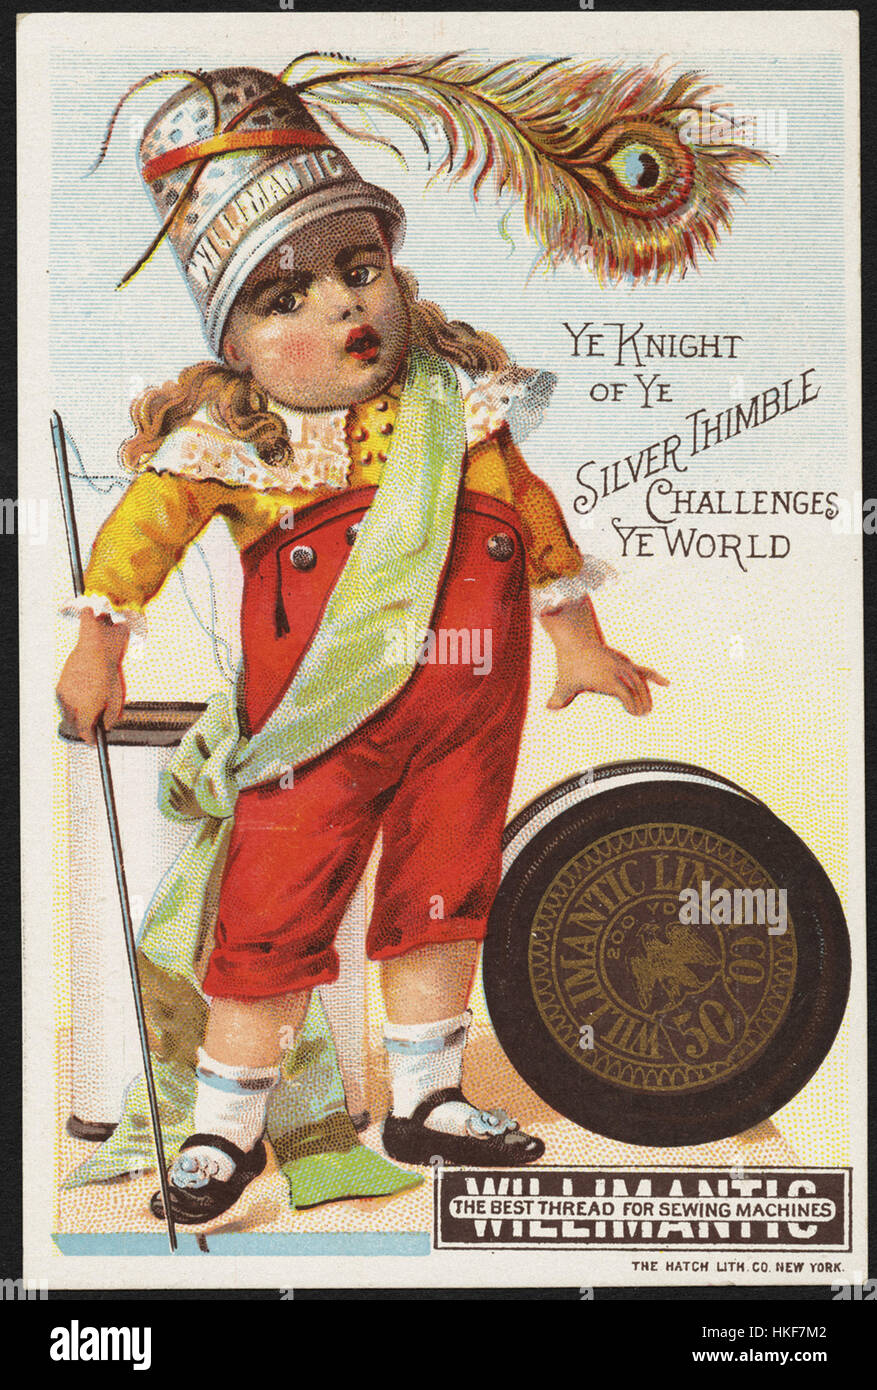 Ye Knight of ye silver thimble challenges ye world, the best thread for sewing machines Stock Photo